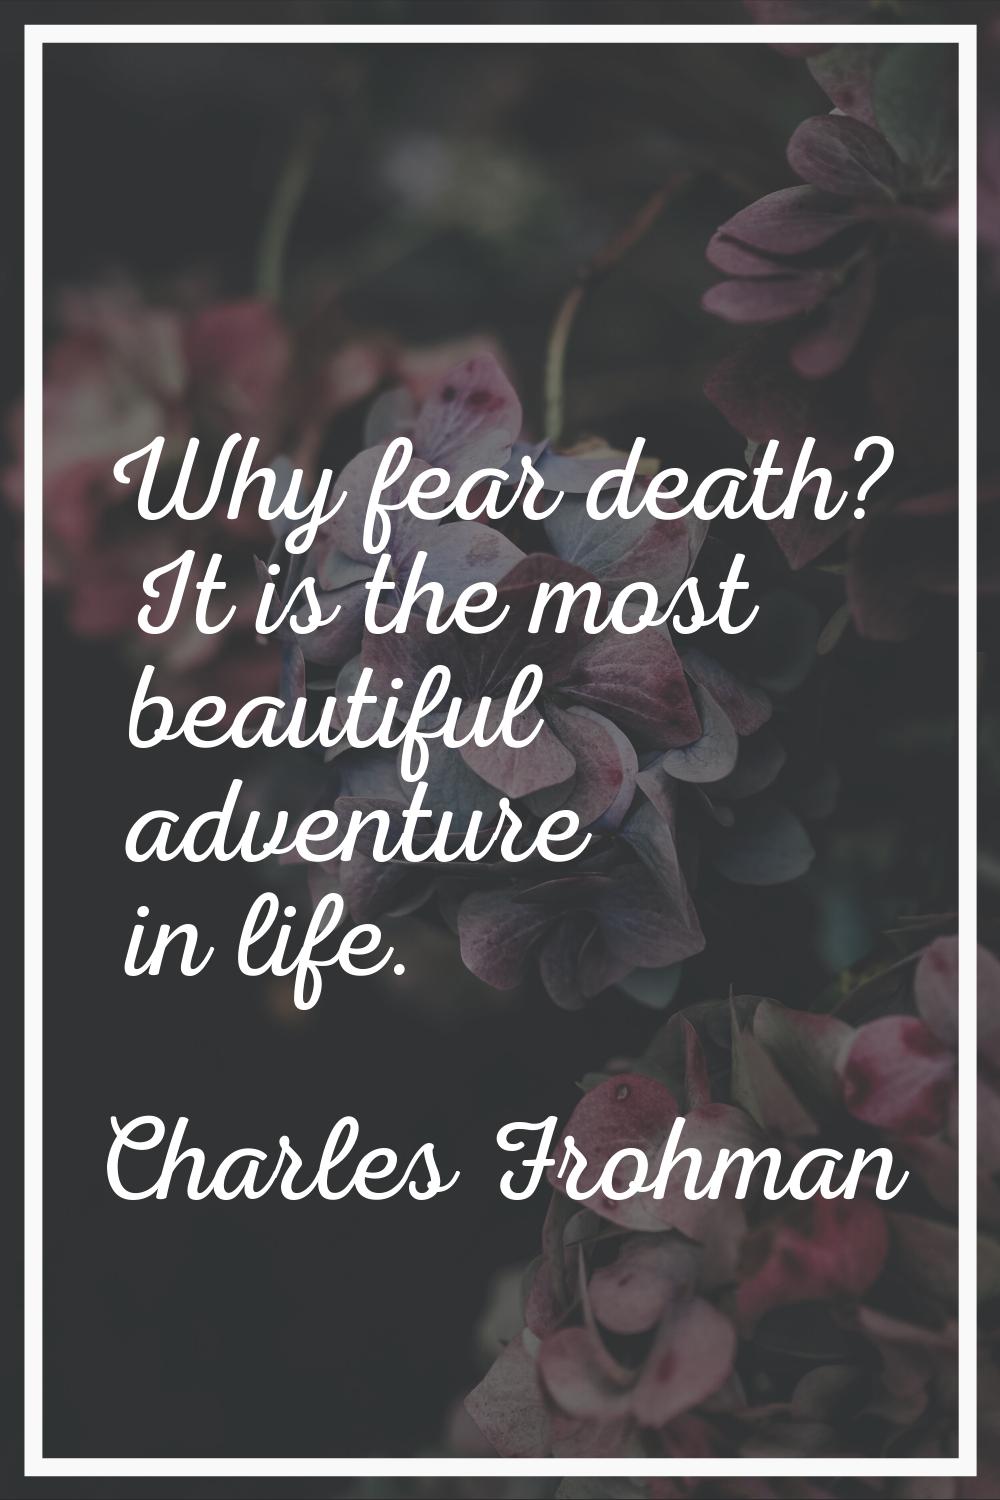 Why fear death? It is the most beautiful adventure in life.